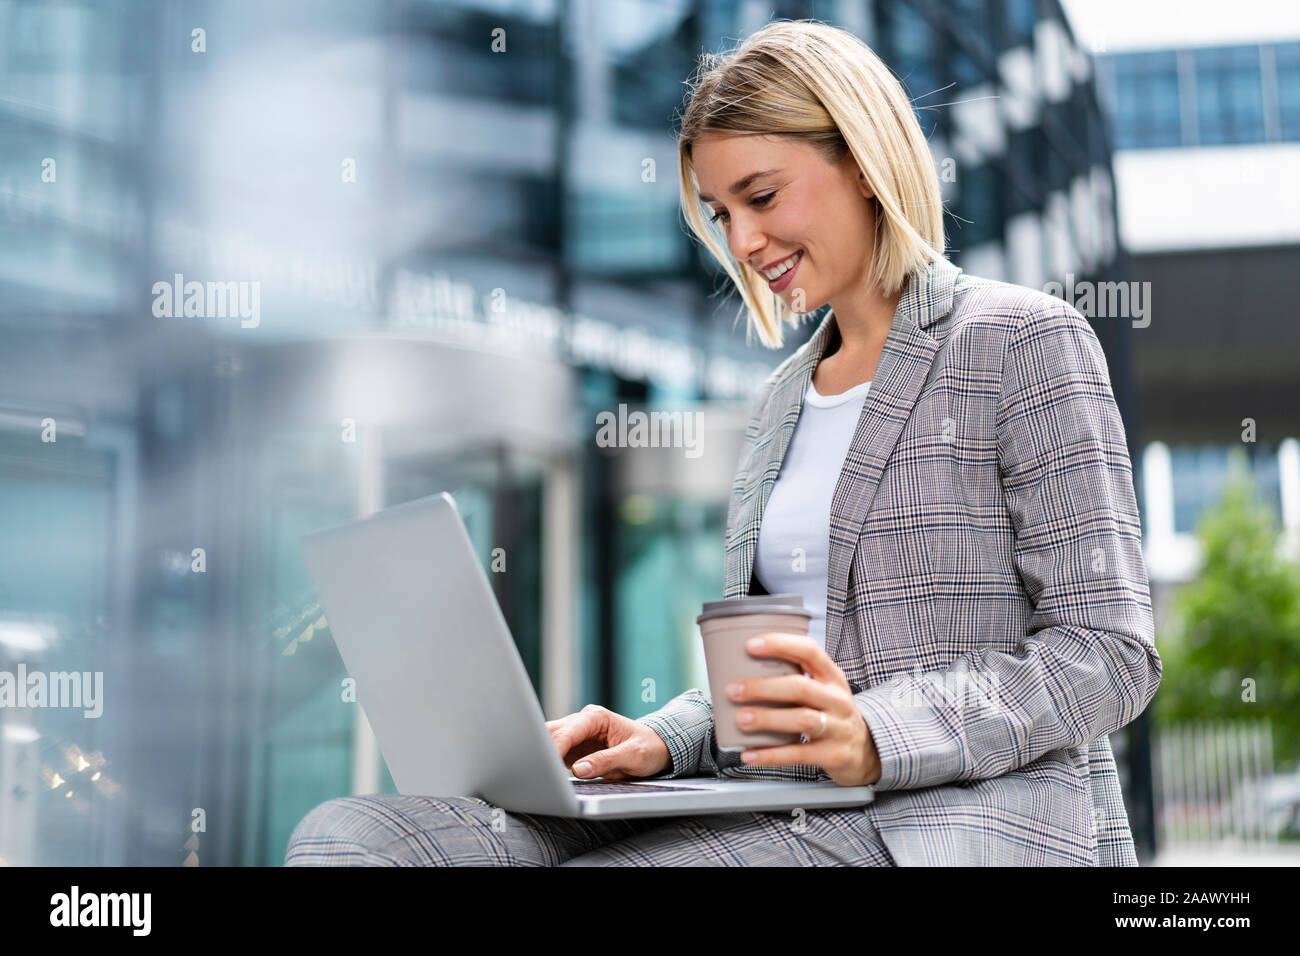 Smiling young businesswoman using laptop in the city Banque D'Images